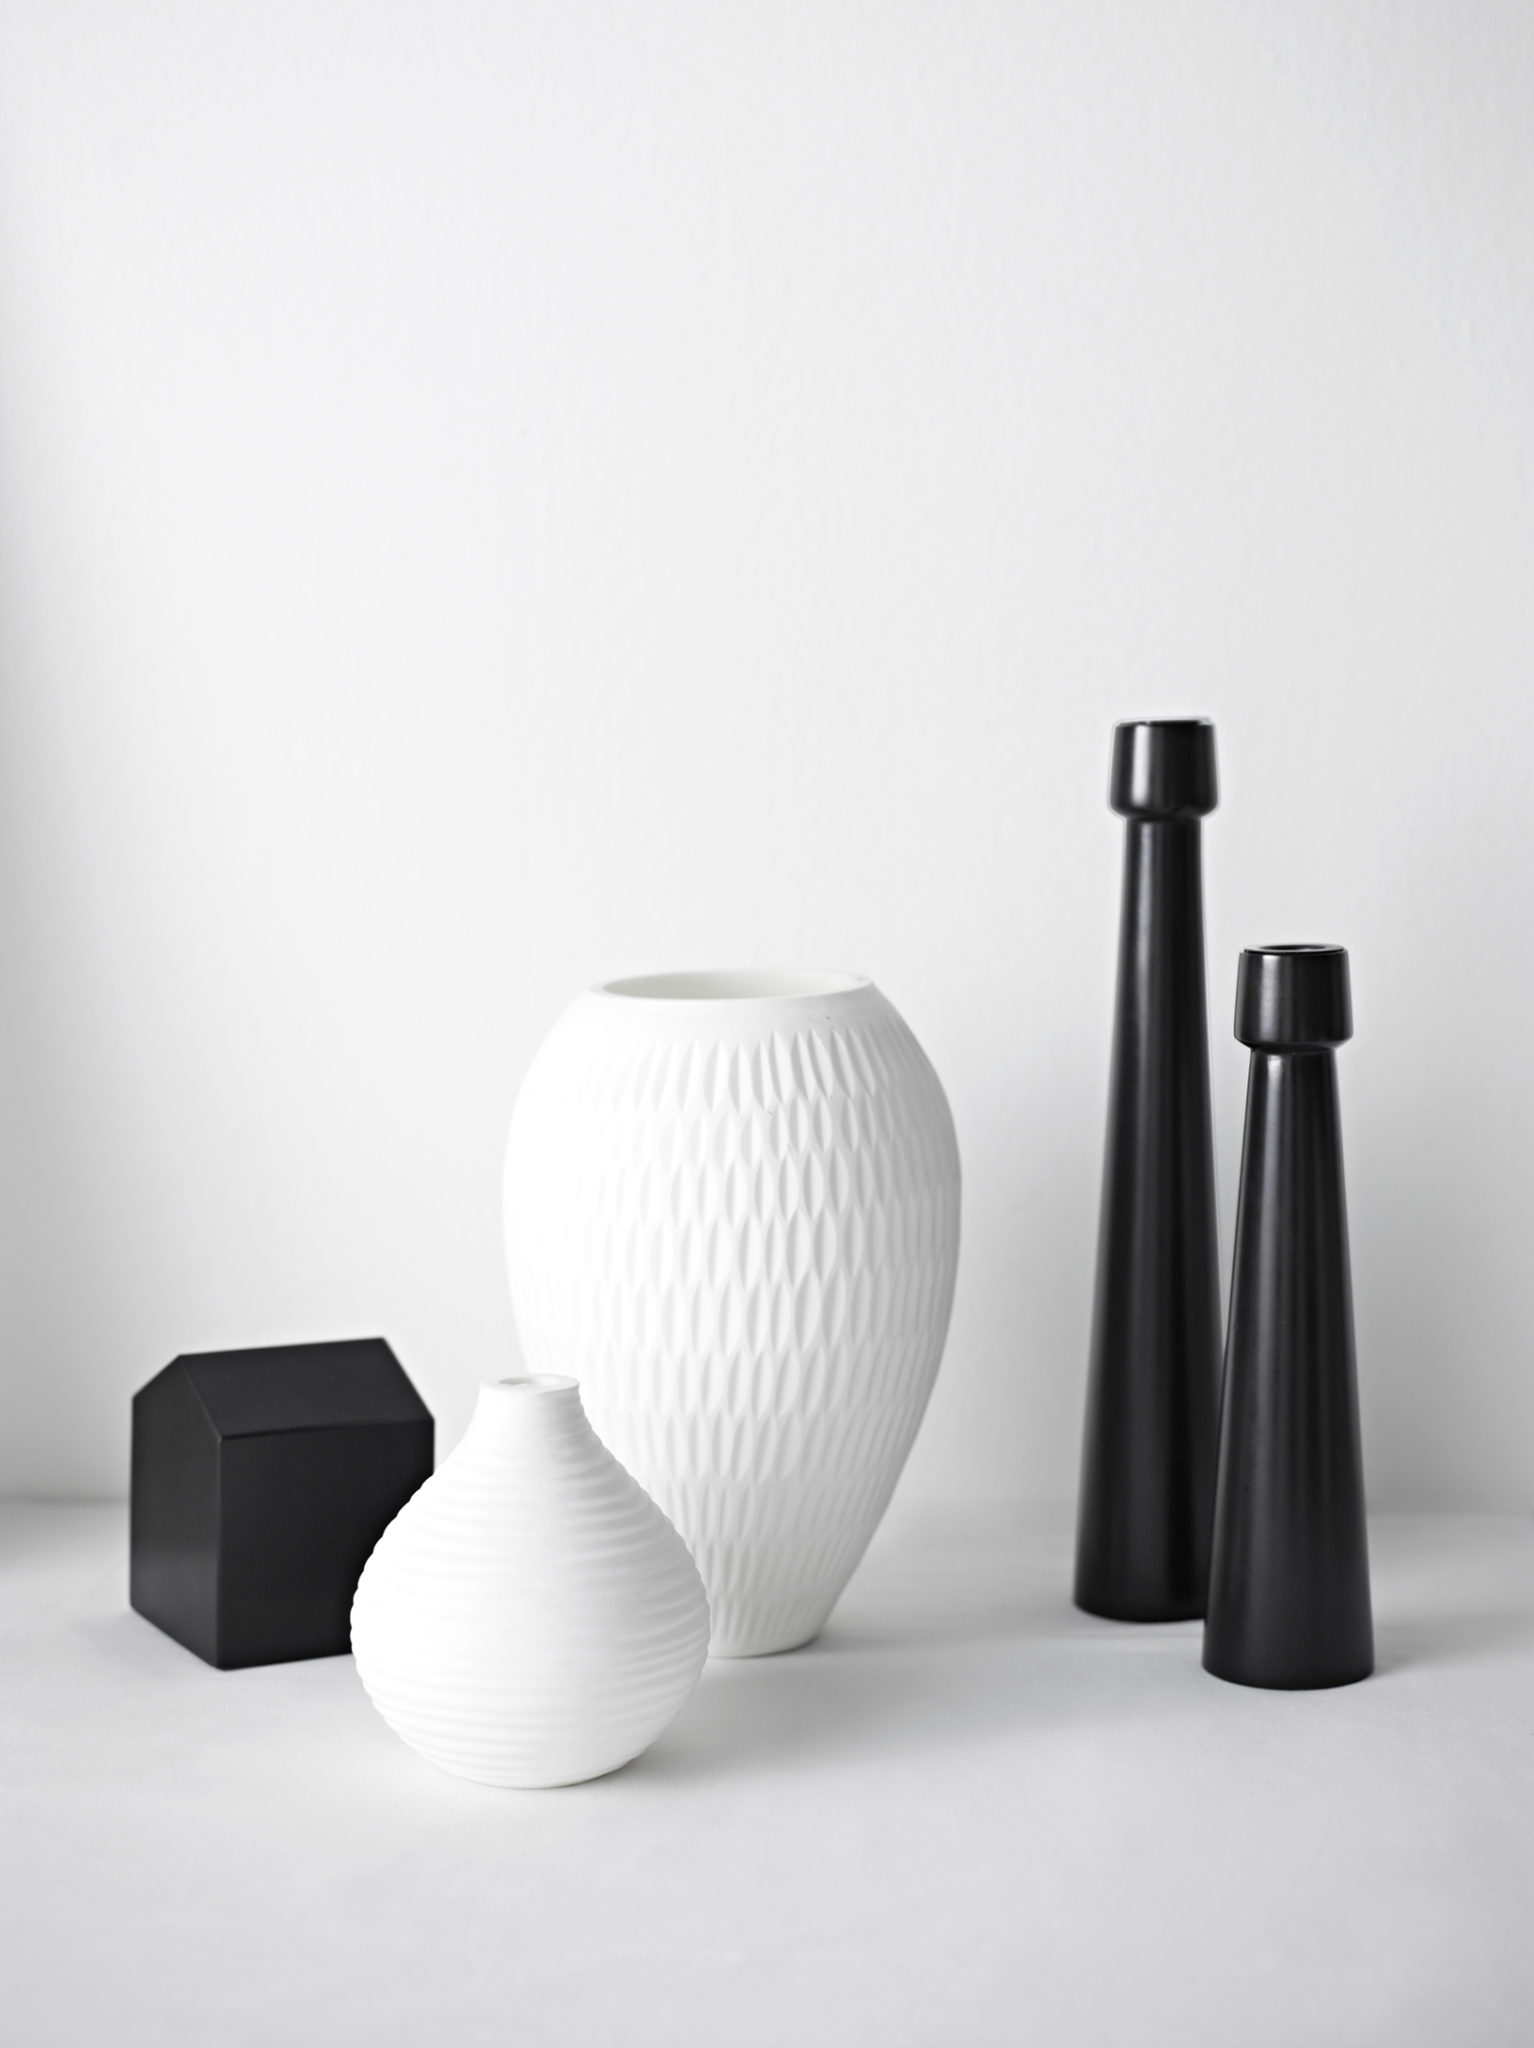 I love the texture of the white vessels paired with the high gloss of the black candlesticks 